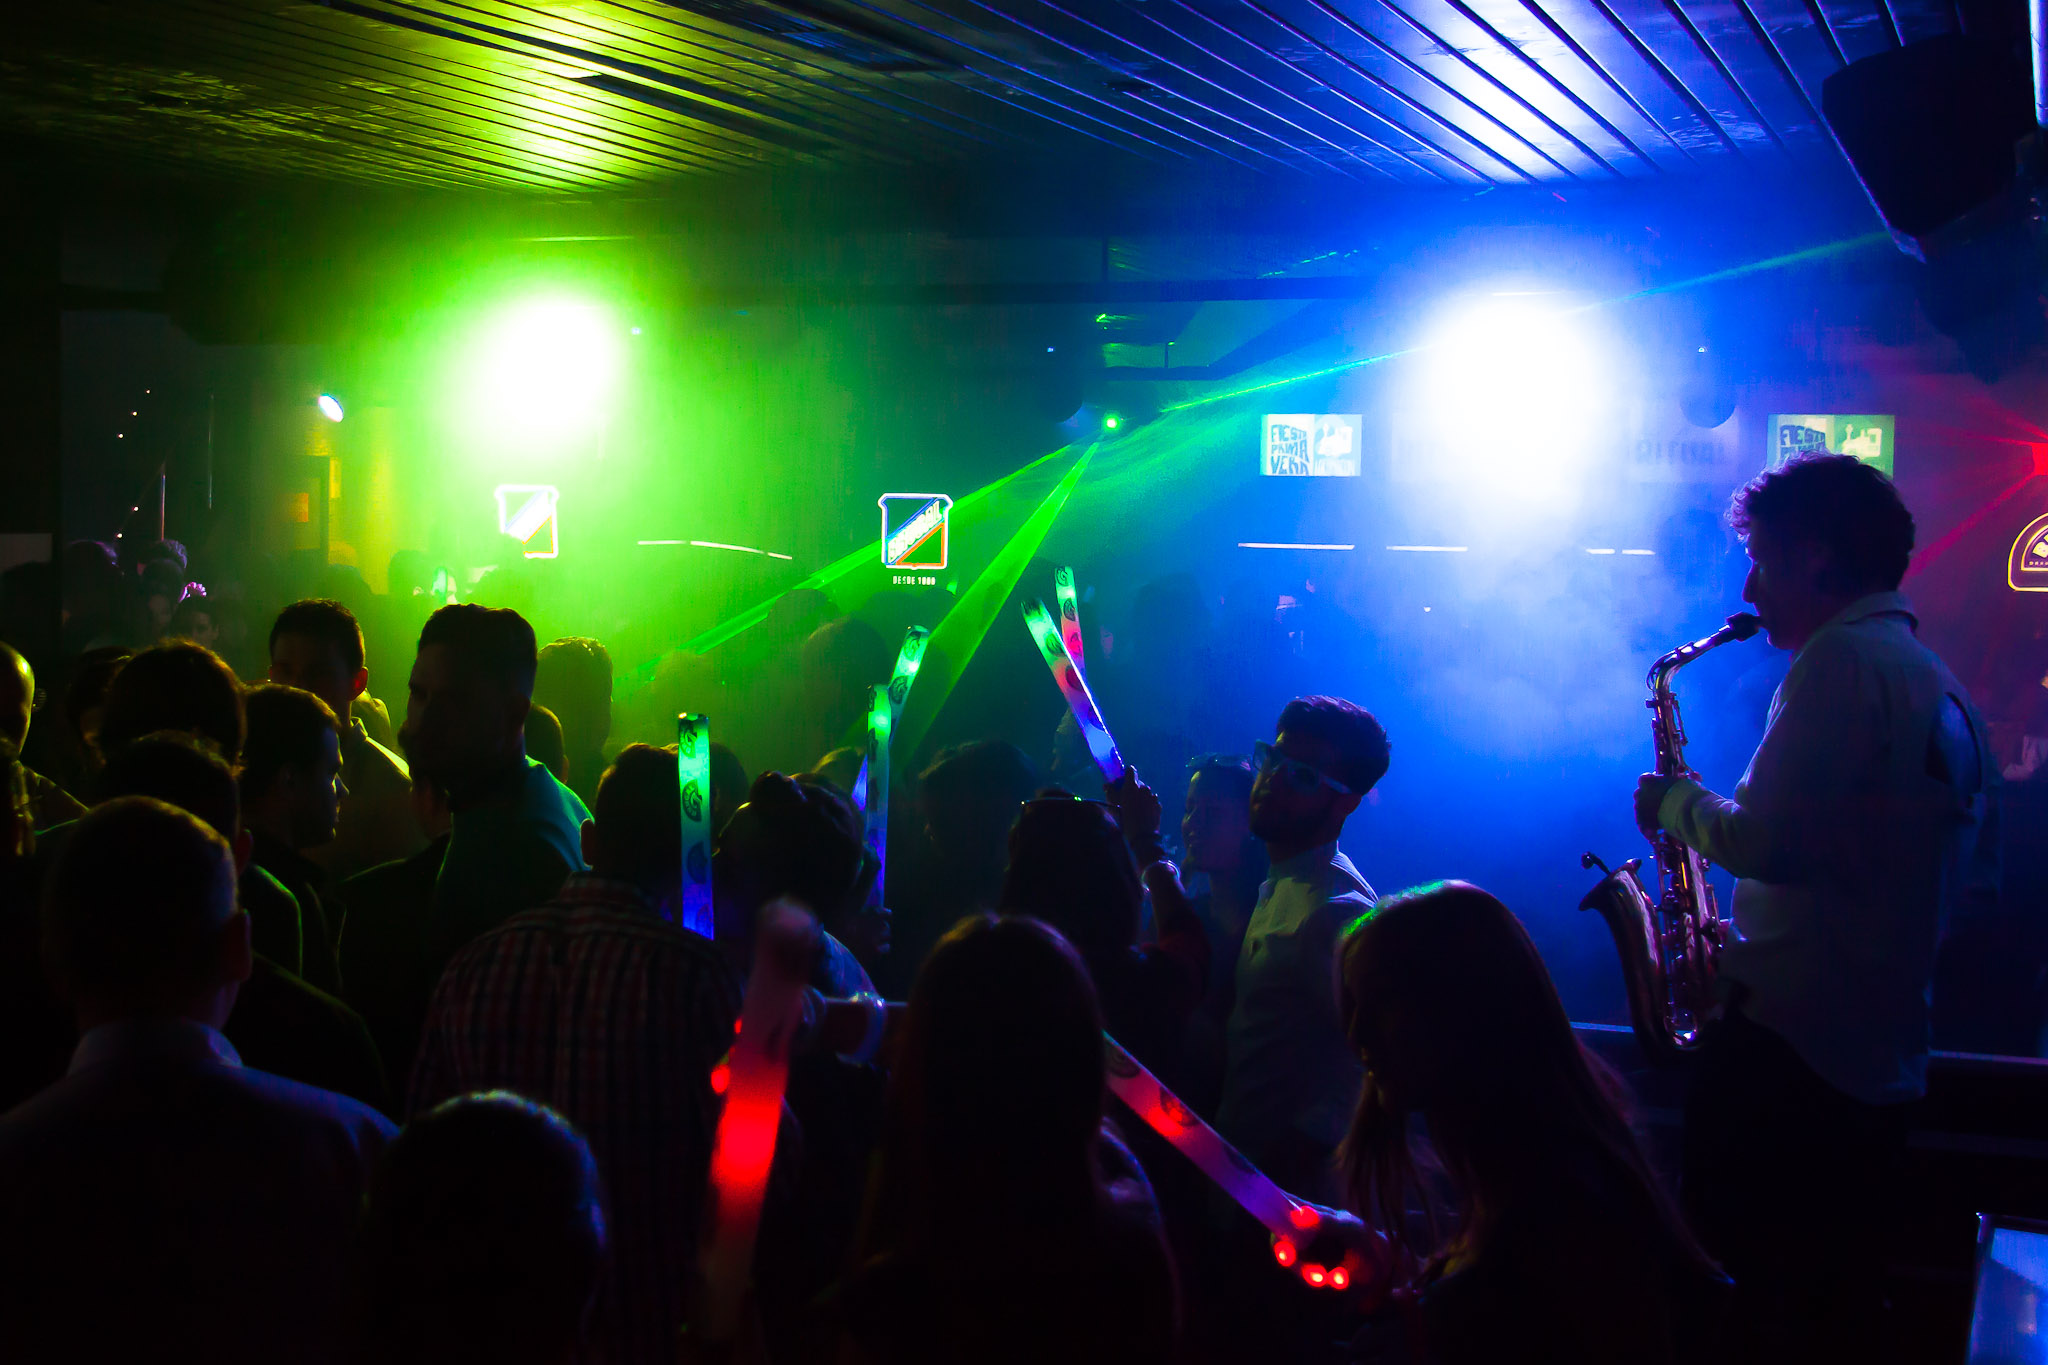 Malaga's nightlife alive with energetic party vibes